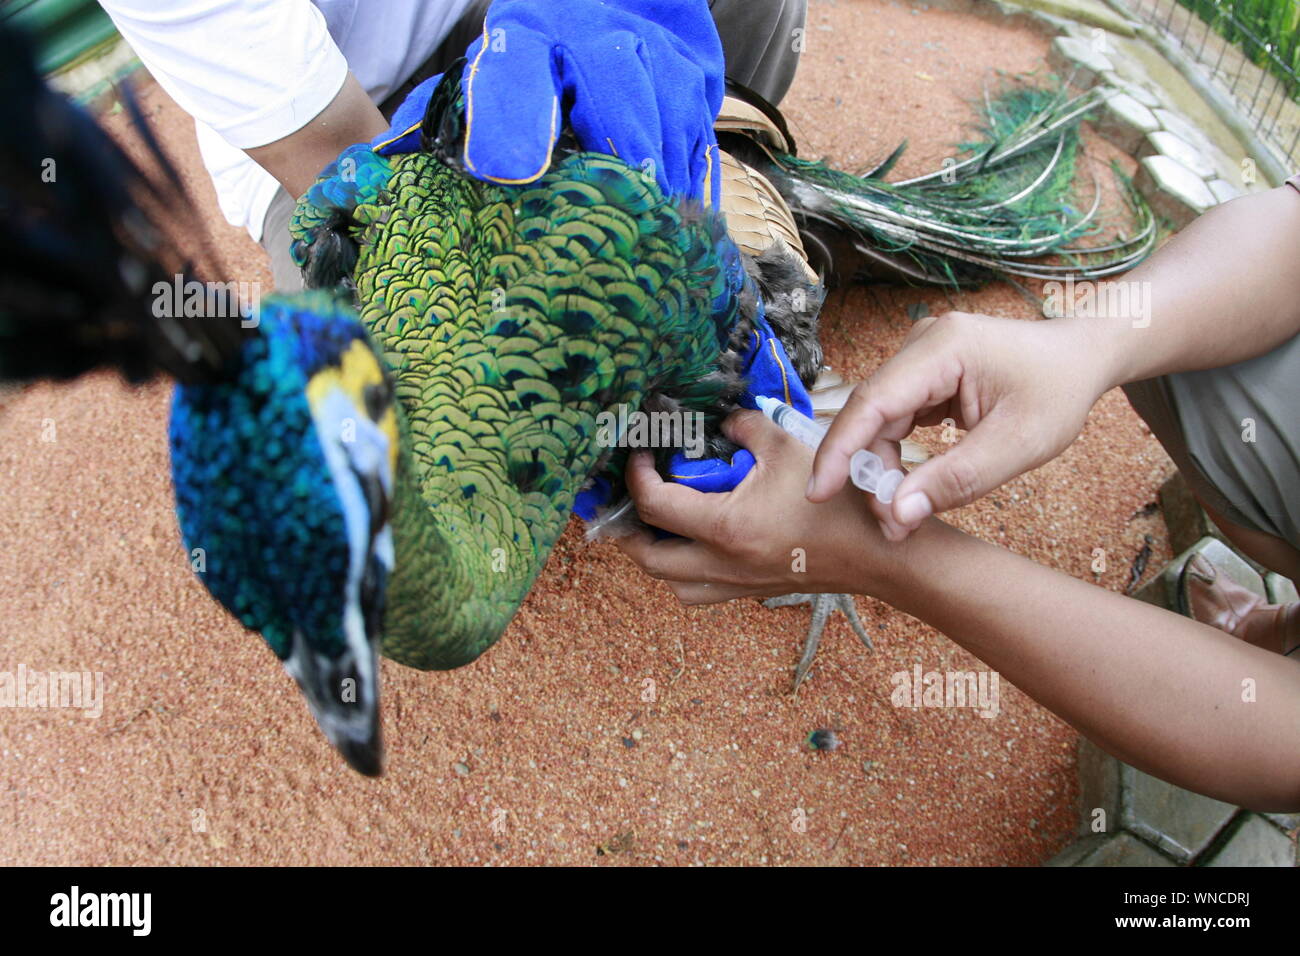 Medical Treatment To Peacock By Veterinarian Stock Photo